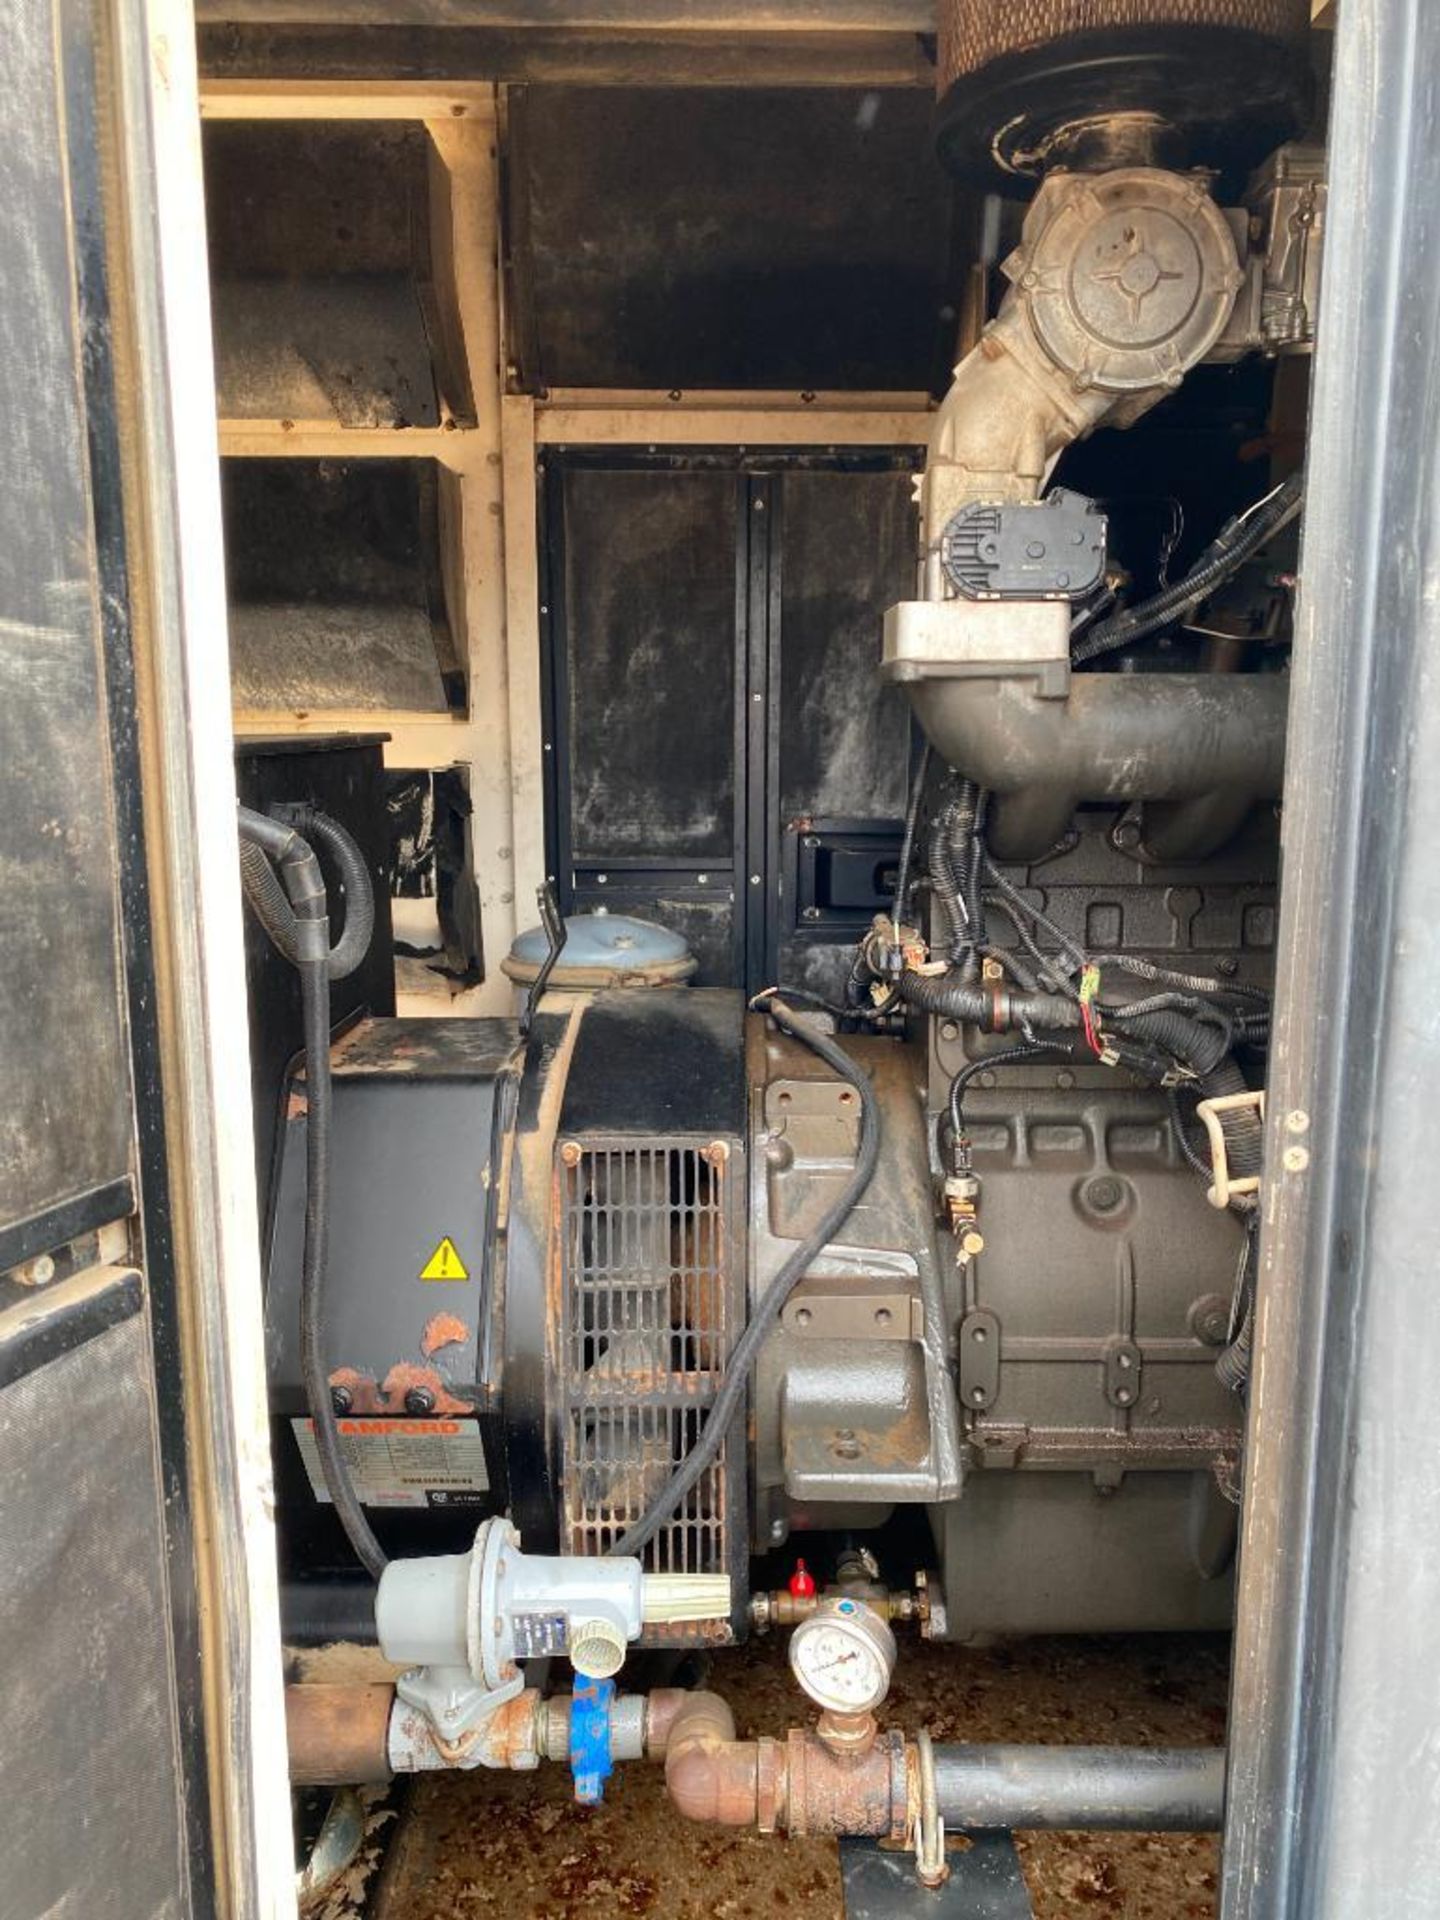 2014 AltaStream Power Systems 125 KVA Towable Generator, Dual Fuel Natural Gas or LP, Model APHG150- - Image 8 of 14